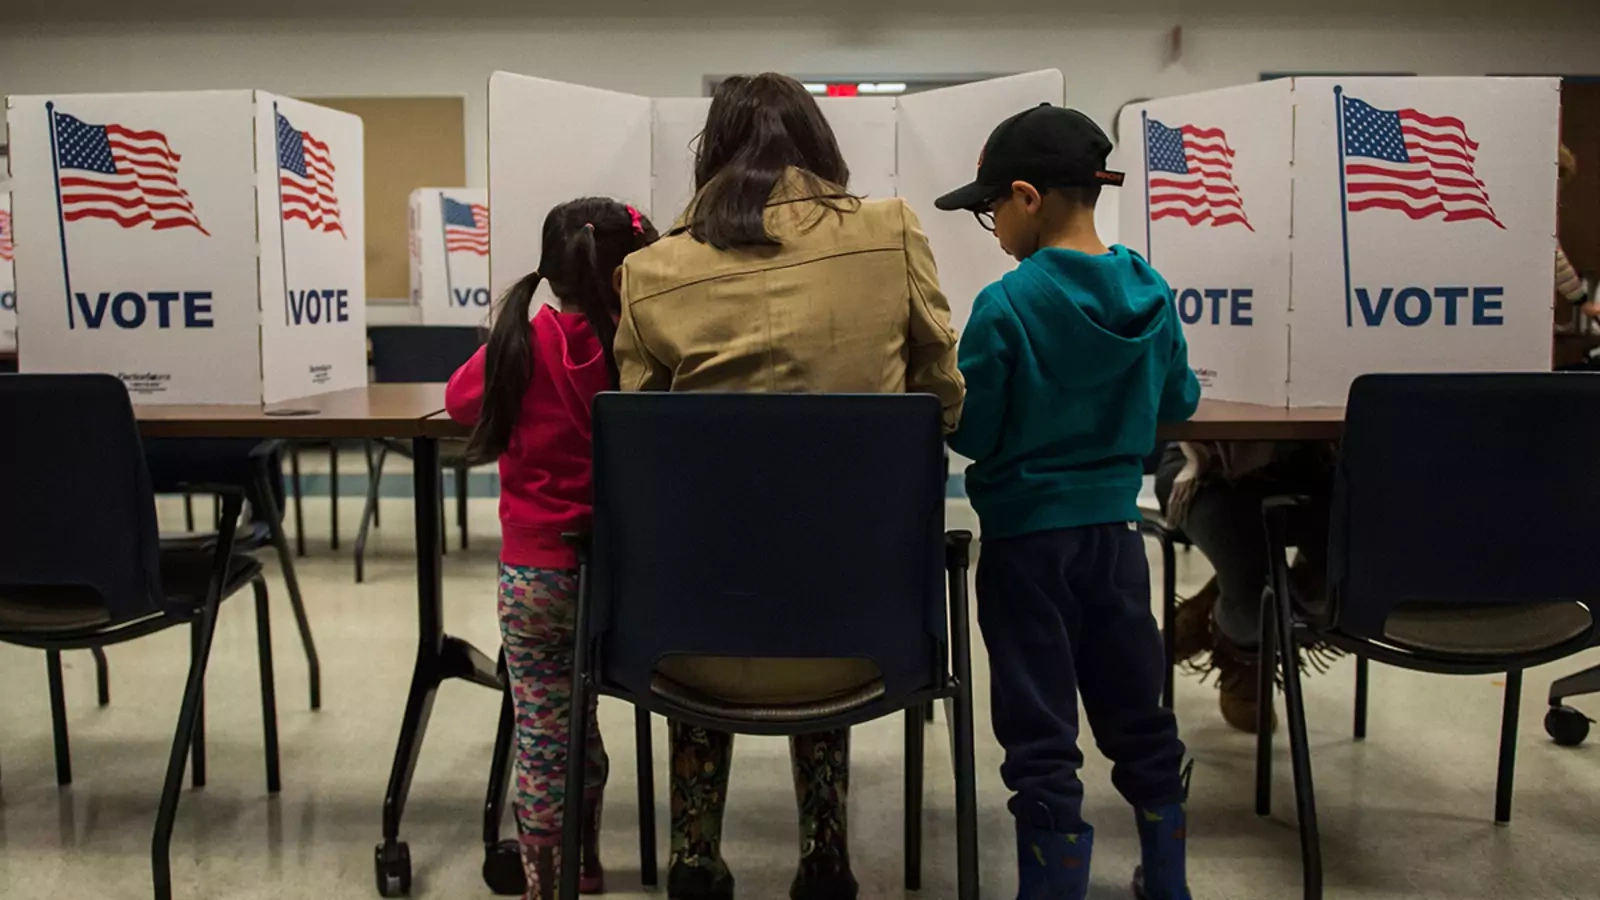 A woman and her children vote at a polling station during the mid-term elections at the Fairfax County bus garage in Lorton, Virginia on November 6, 2018.